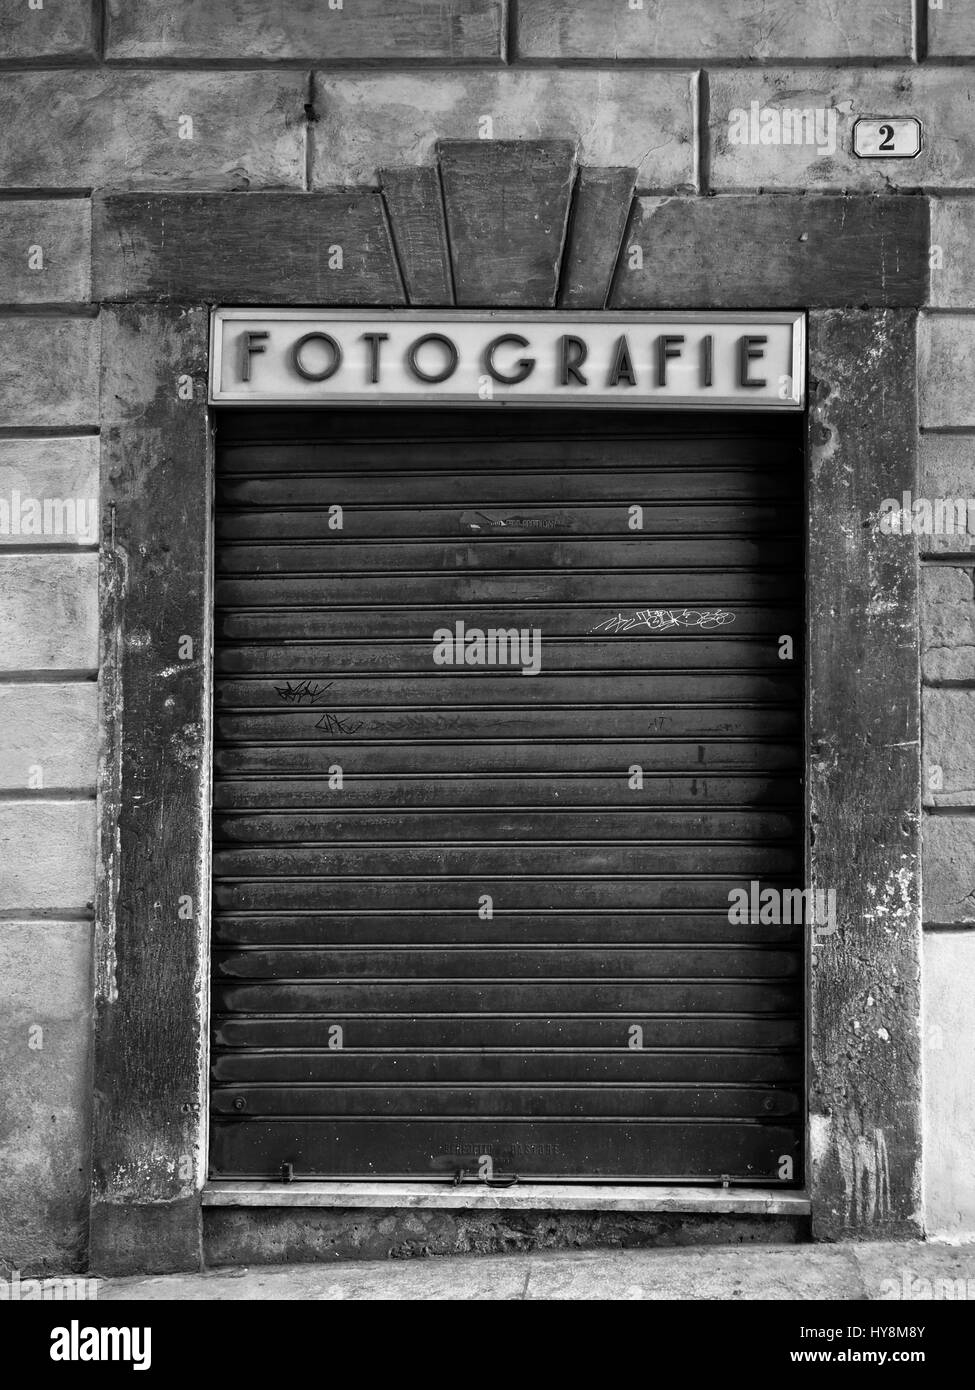 abandoned closed photography shop in italy Stock Photo